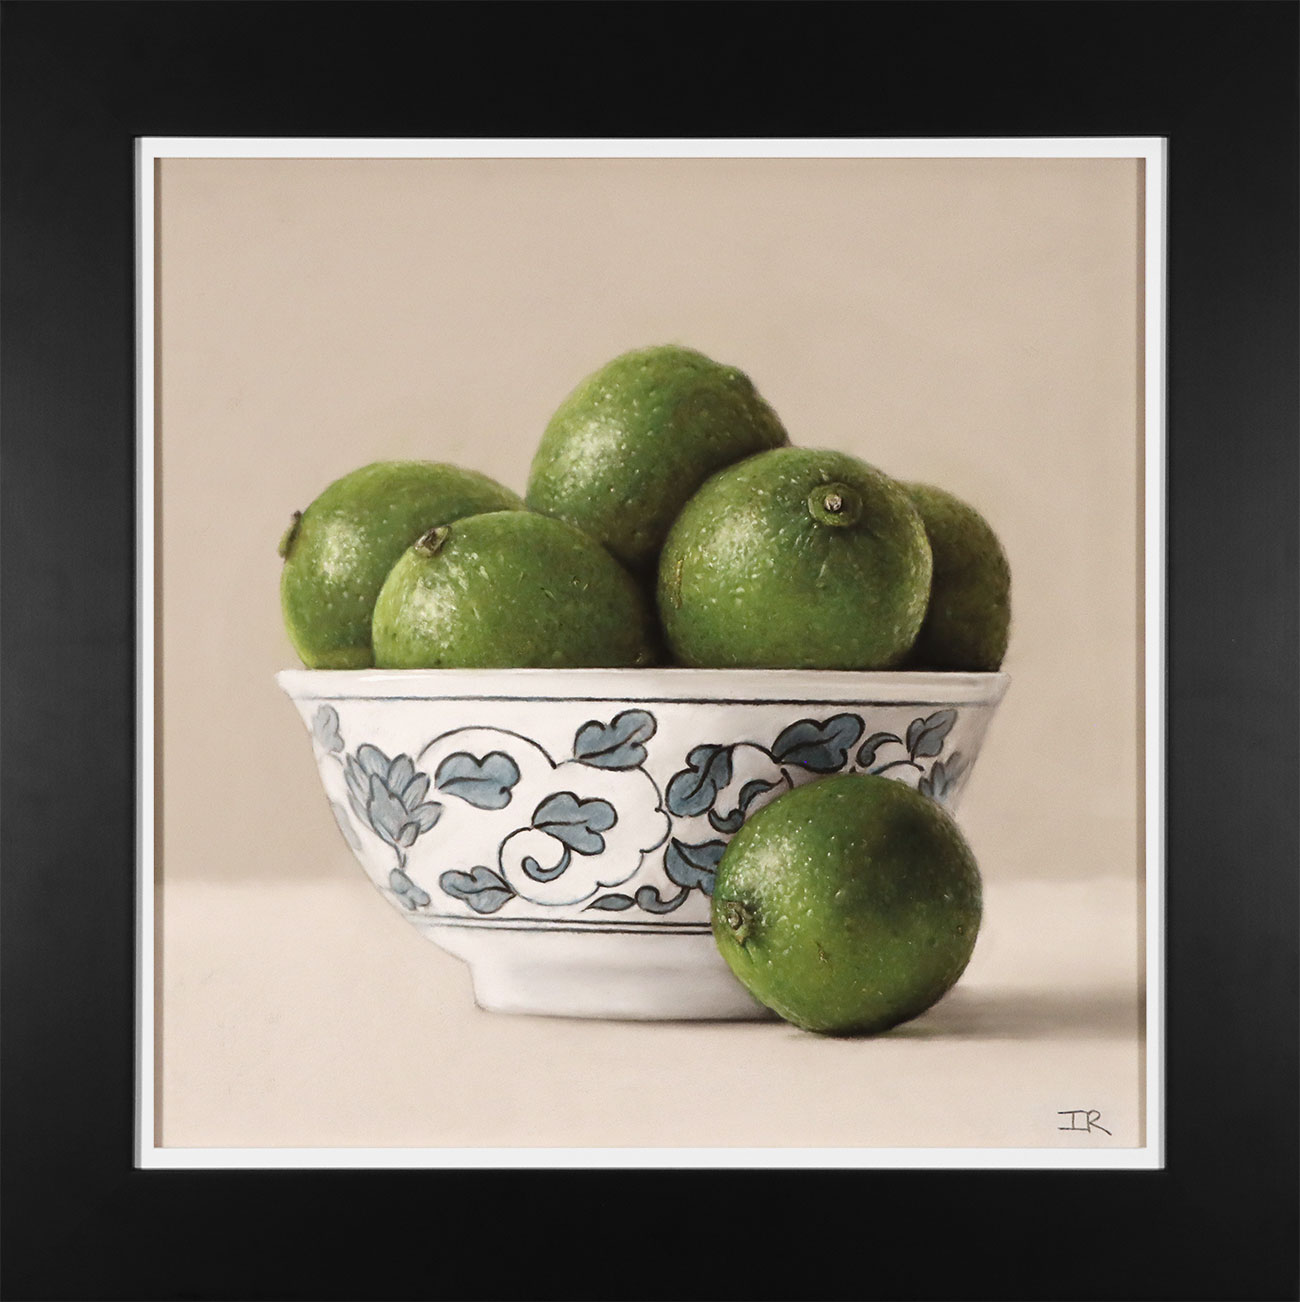 Ian Rawling, Pastel, Bowl of Limes. Click to enlarge